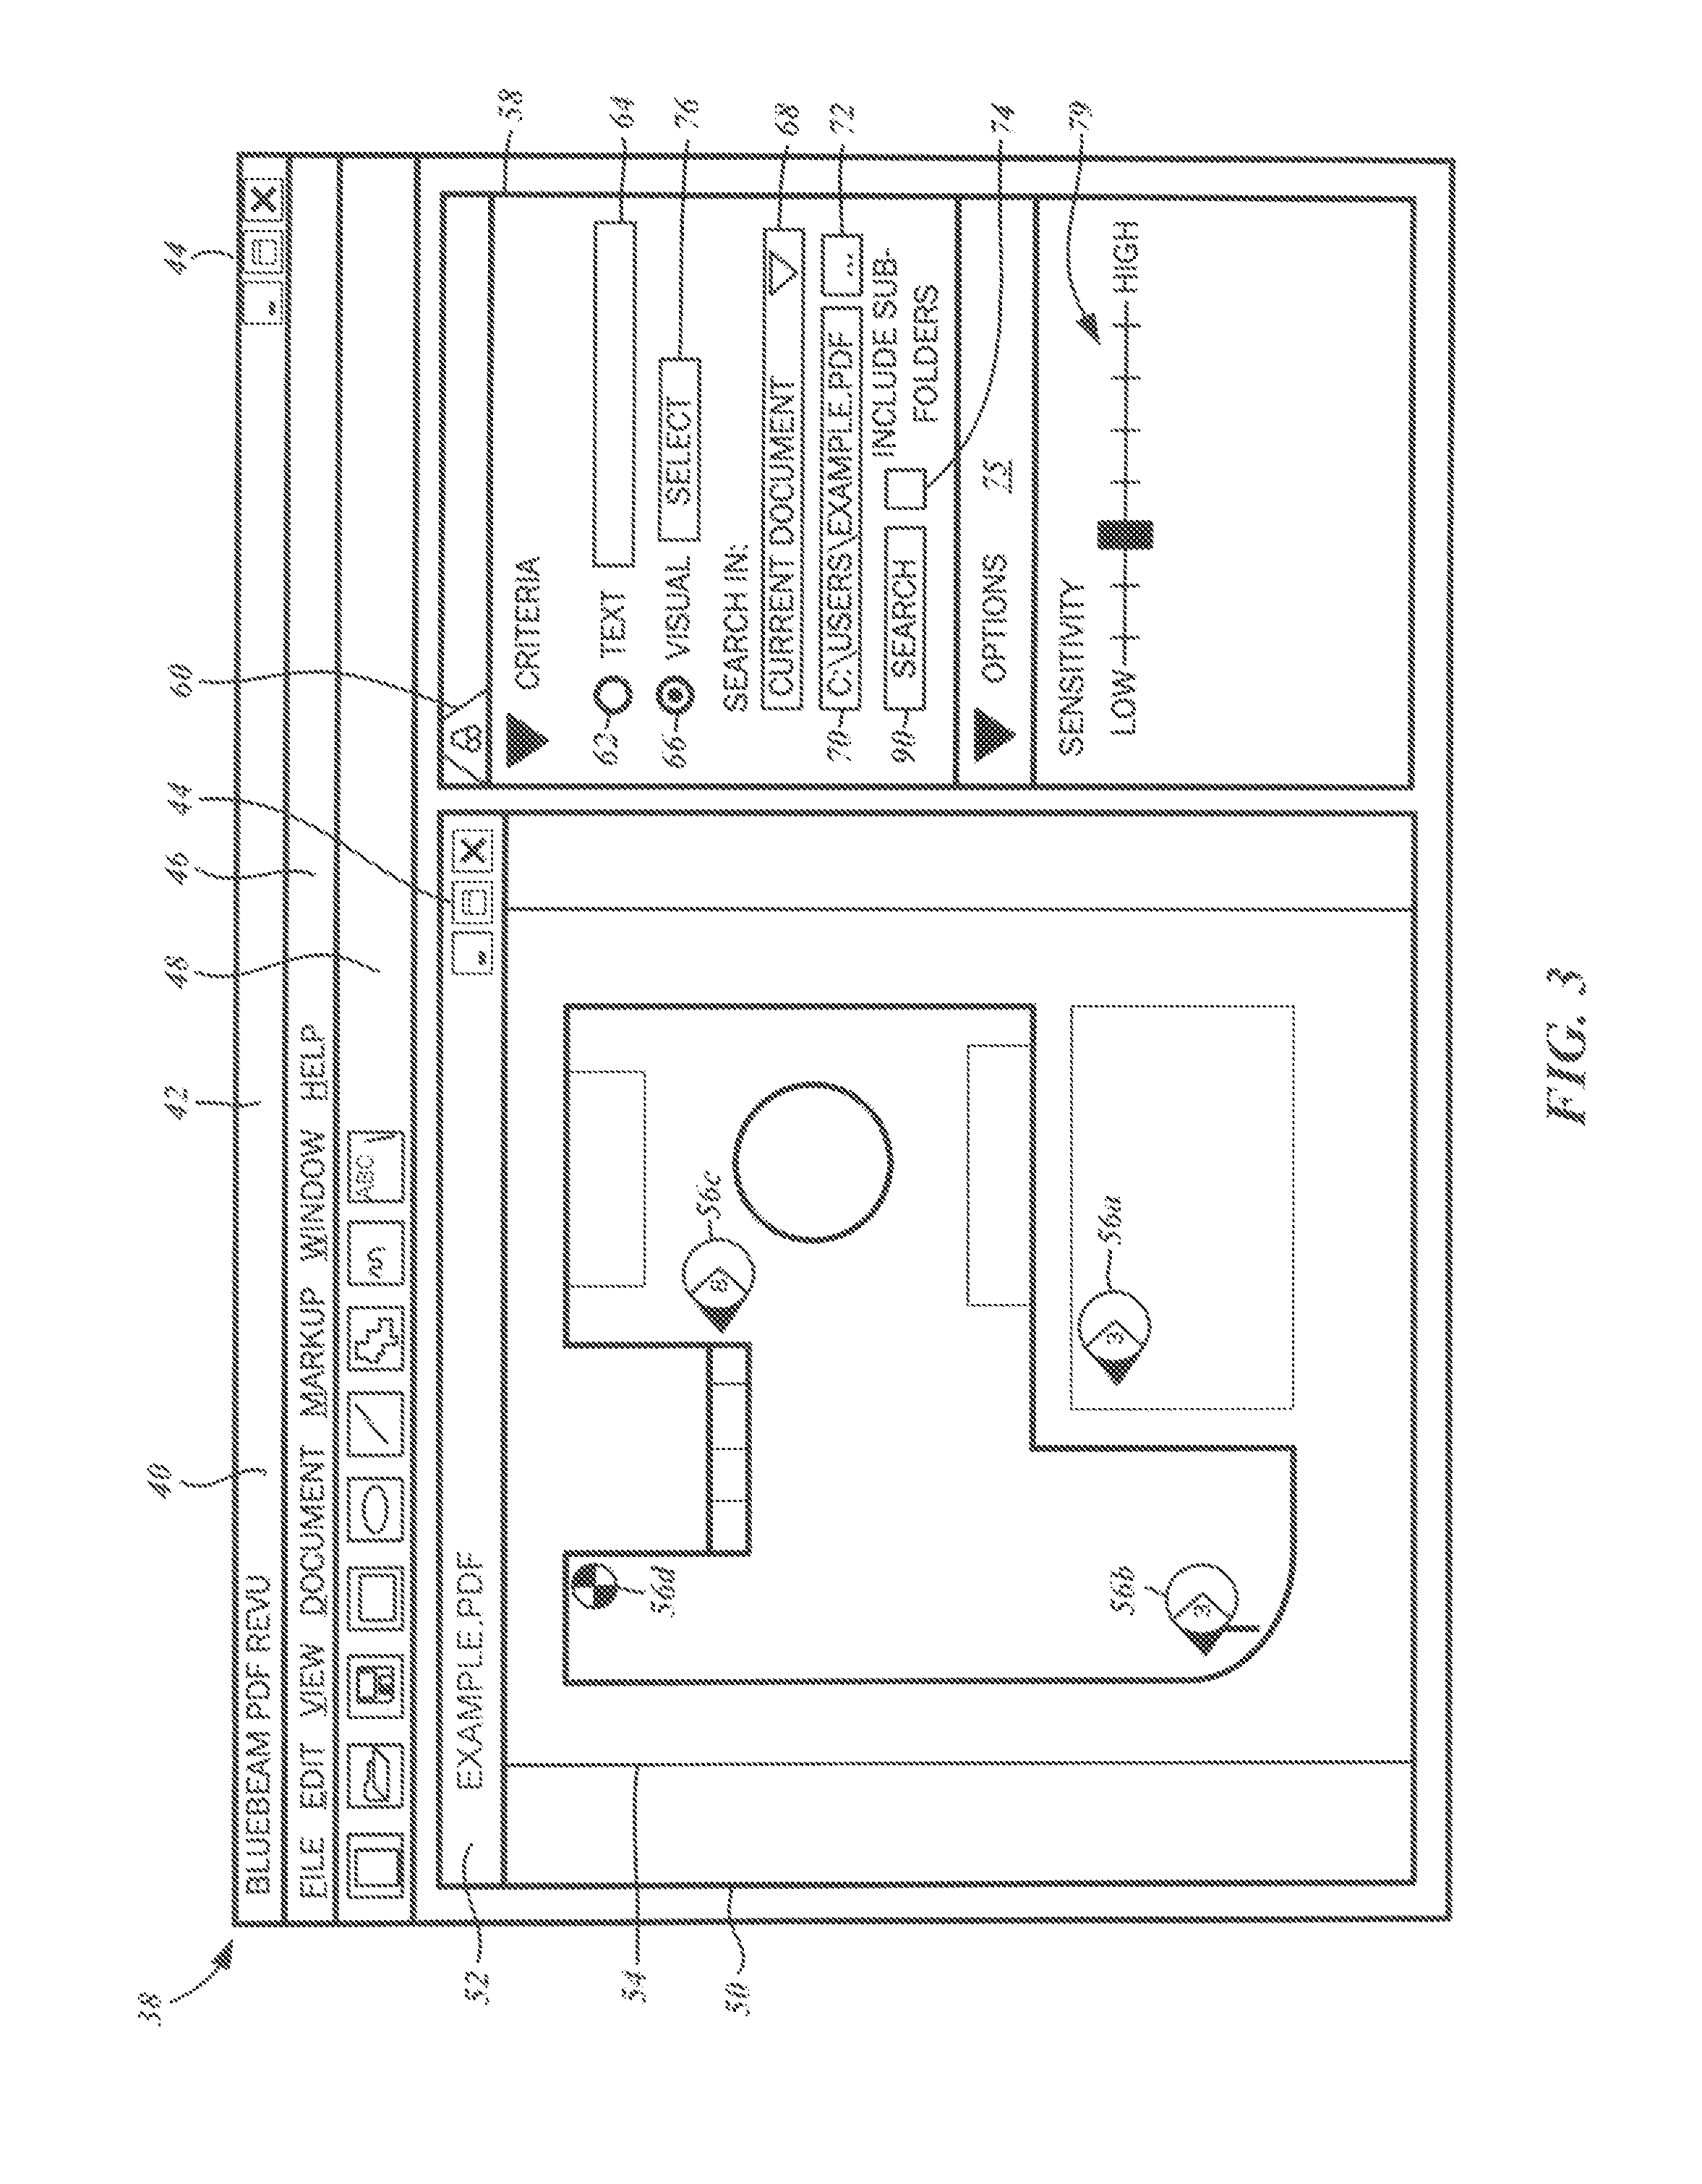 Method for multiple pass symbol and components-based visual object searching of documents